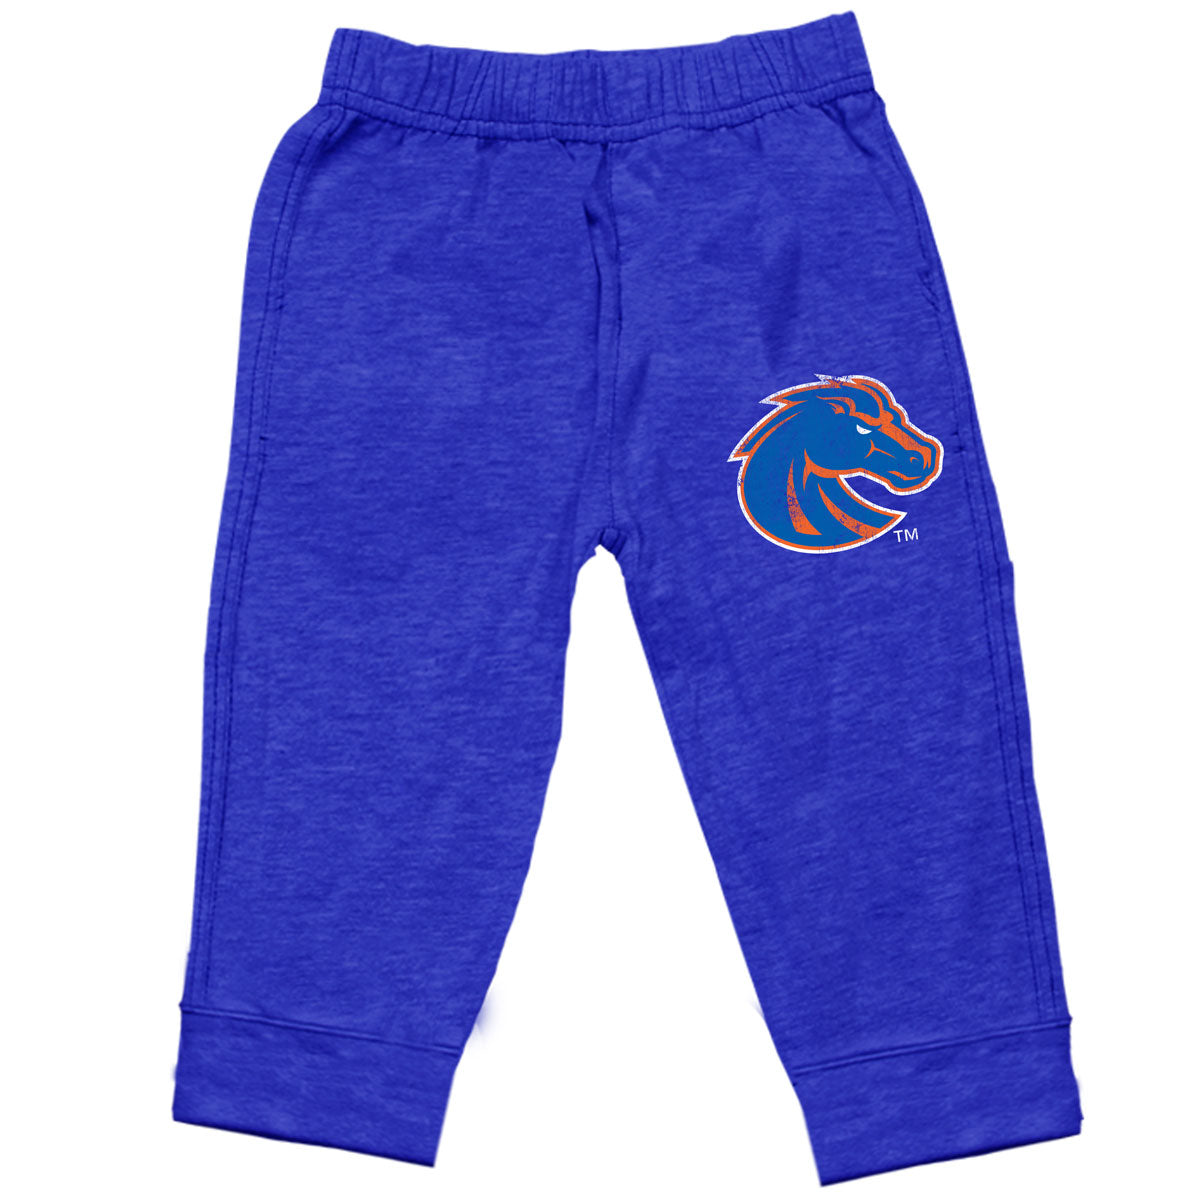 Wes & Willy Boise State Bronco's Fleece Pants